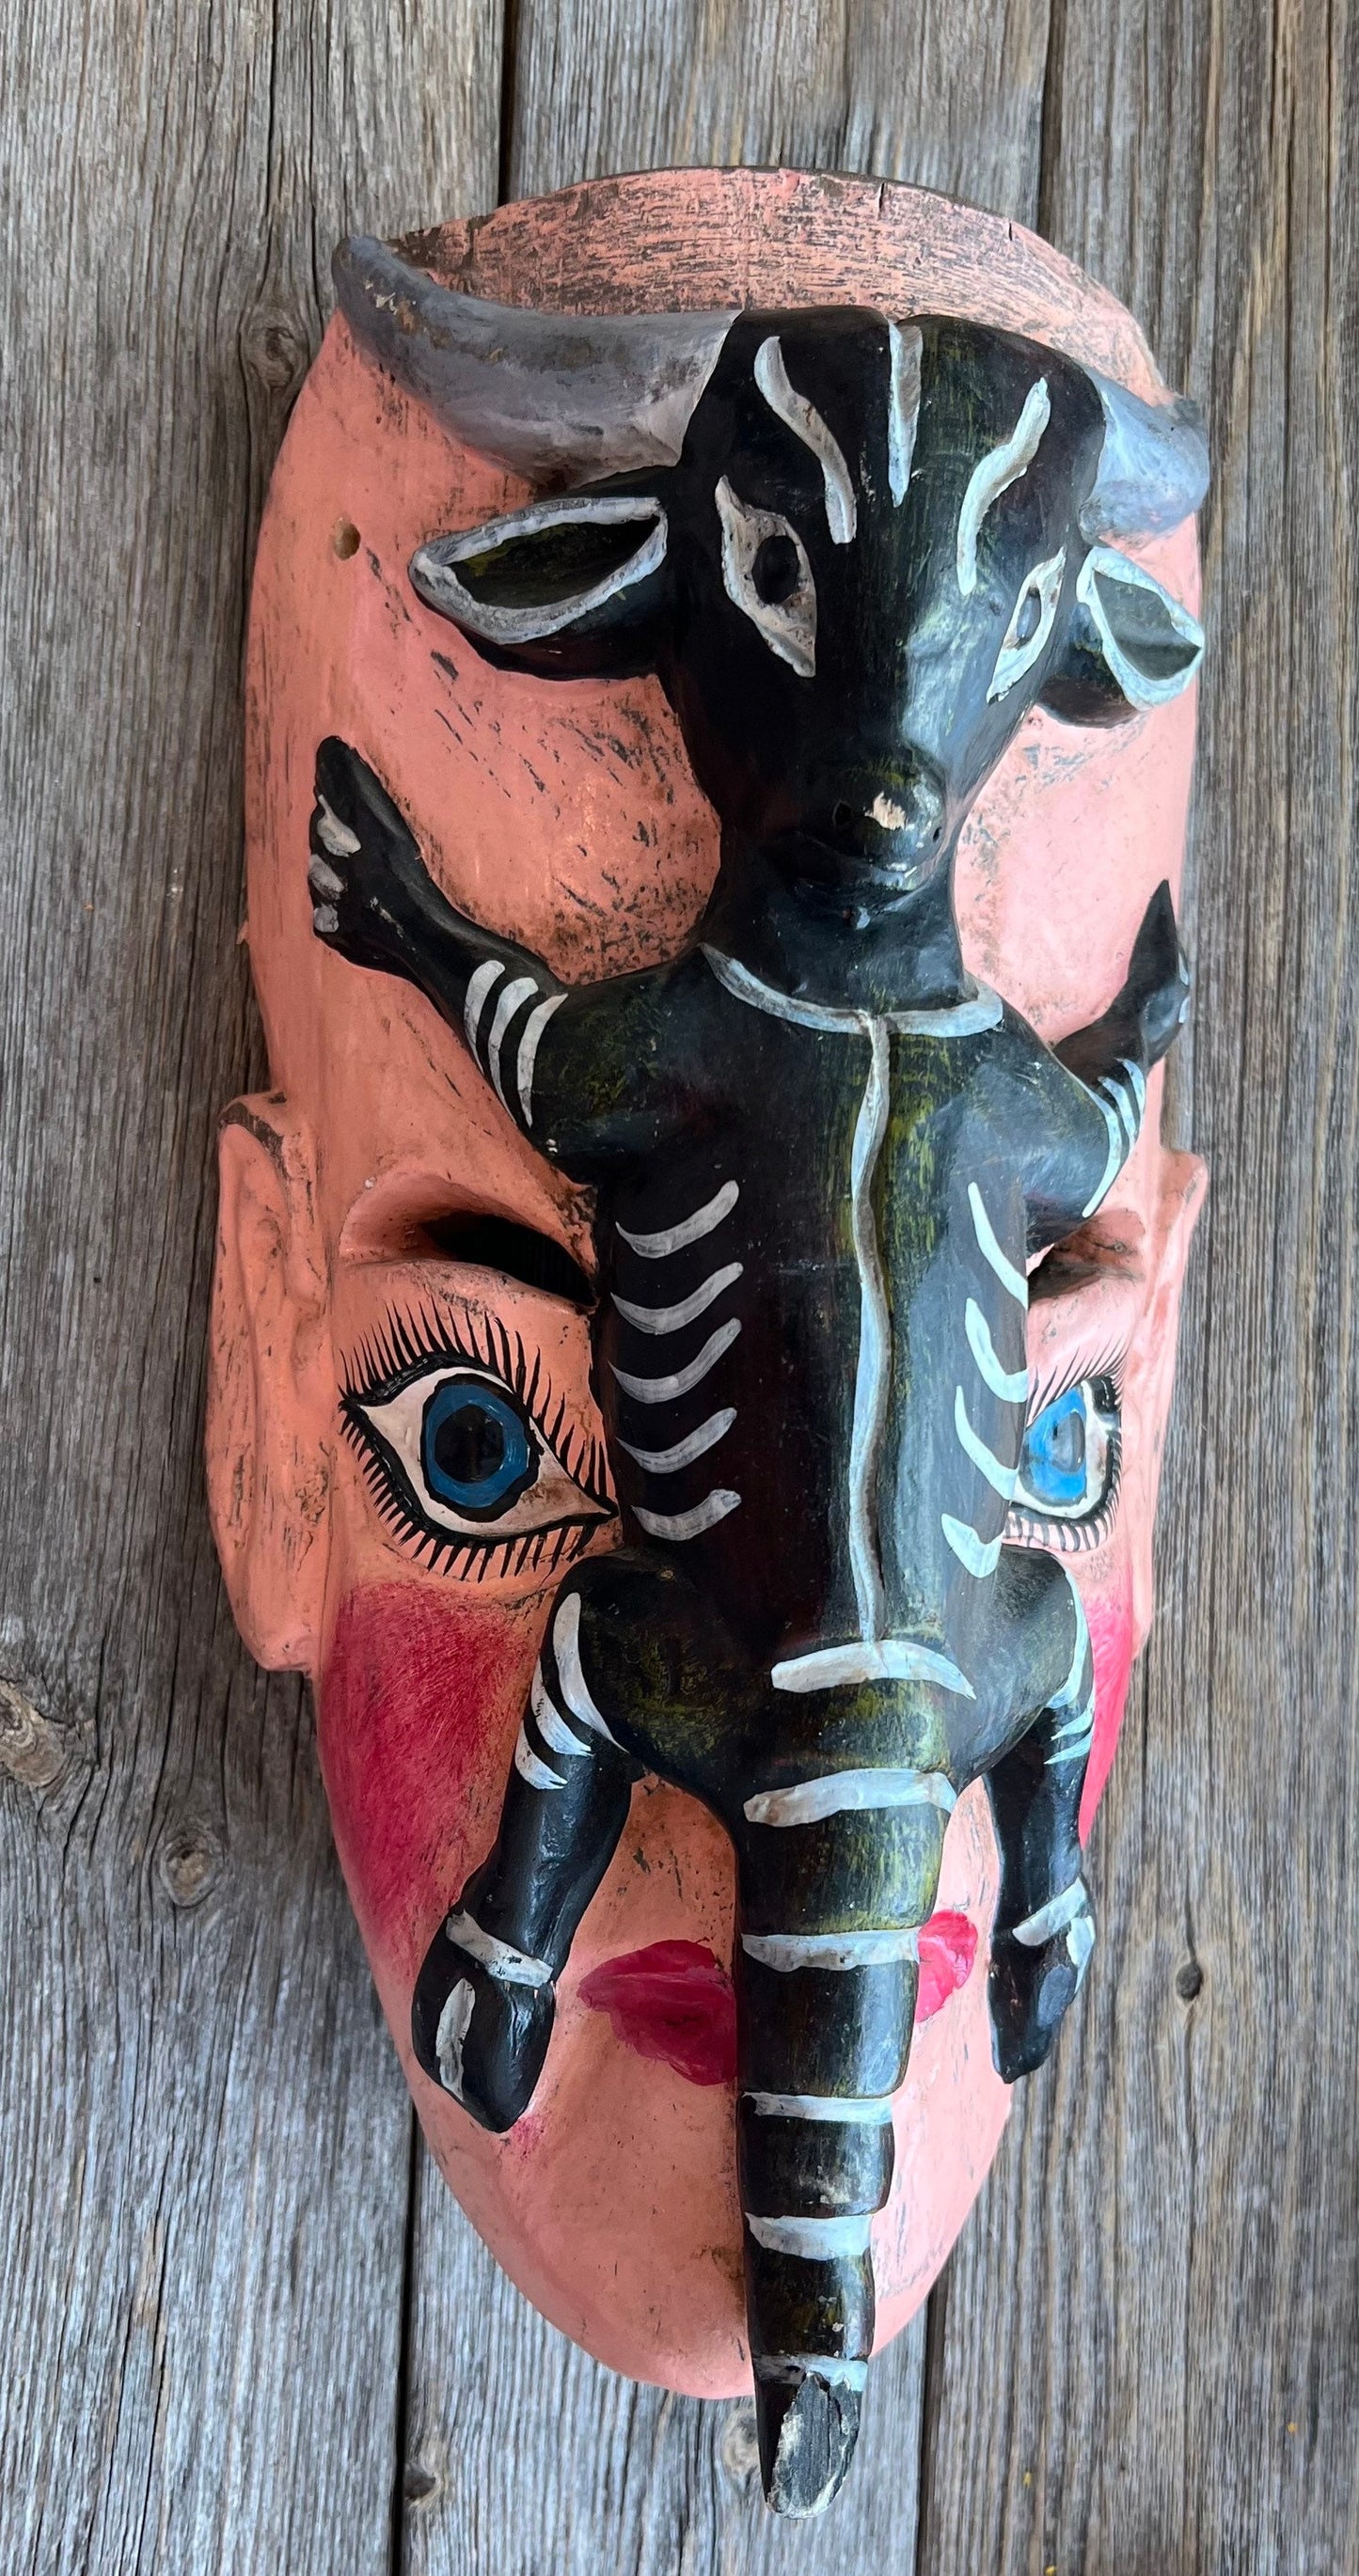 VERY RARE Vintage Goat on Face Altar Mask + Wood + Handcrafted in Mexico + Baphomet + One of a Kind!